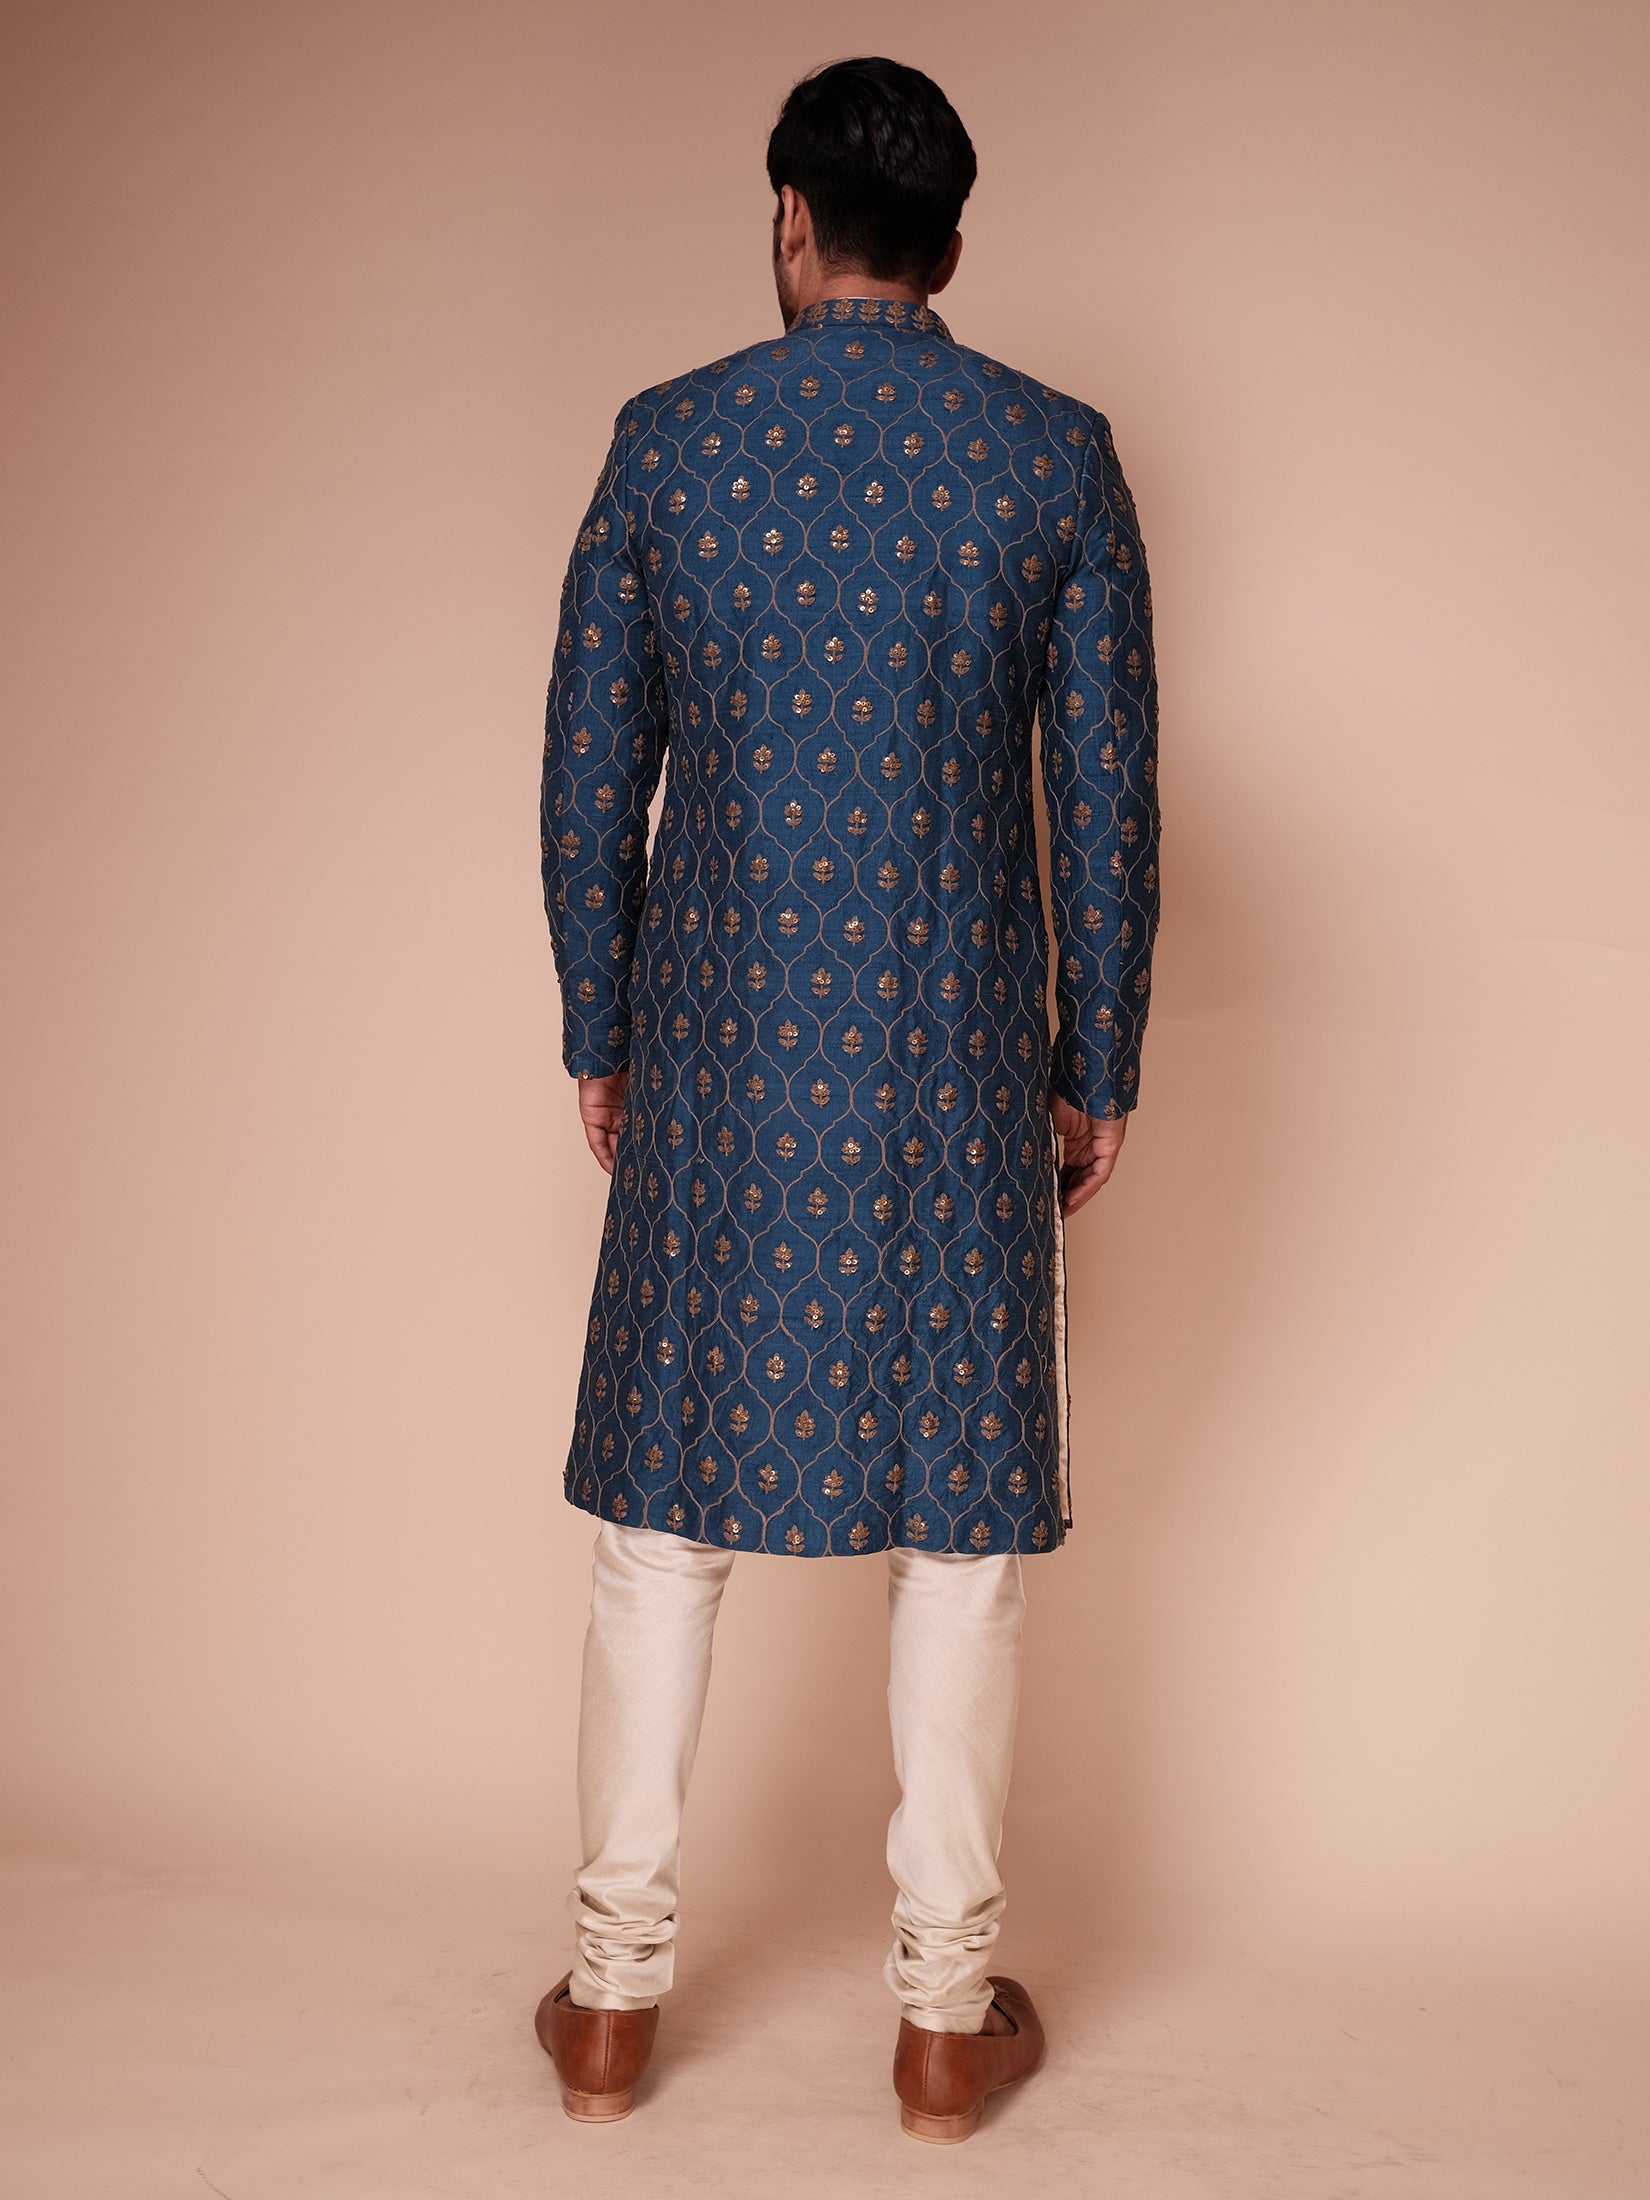 Teal Sherwani With Embroidered Structure Jaal And Water Lily Motifs Paired With Kurta And Churidar